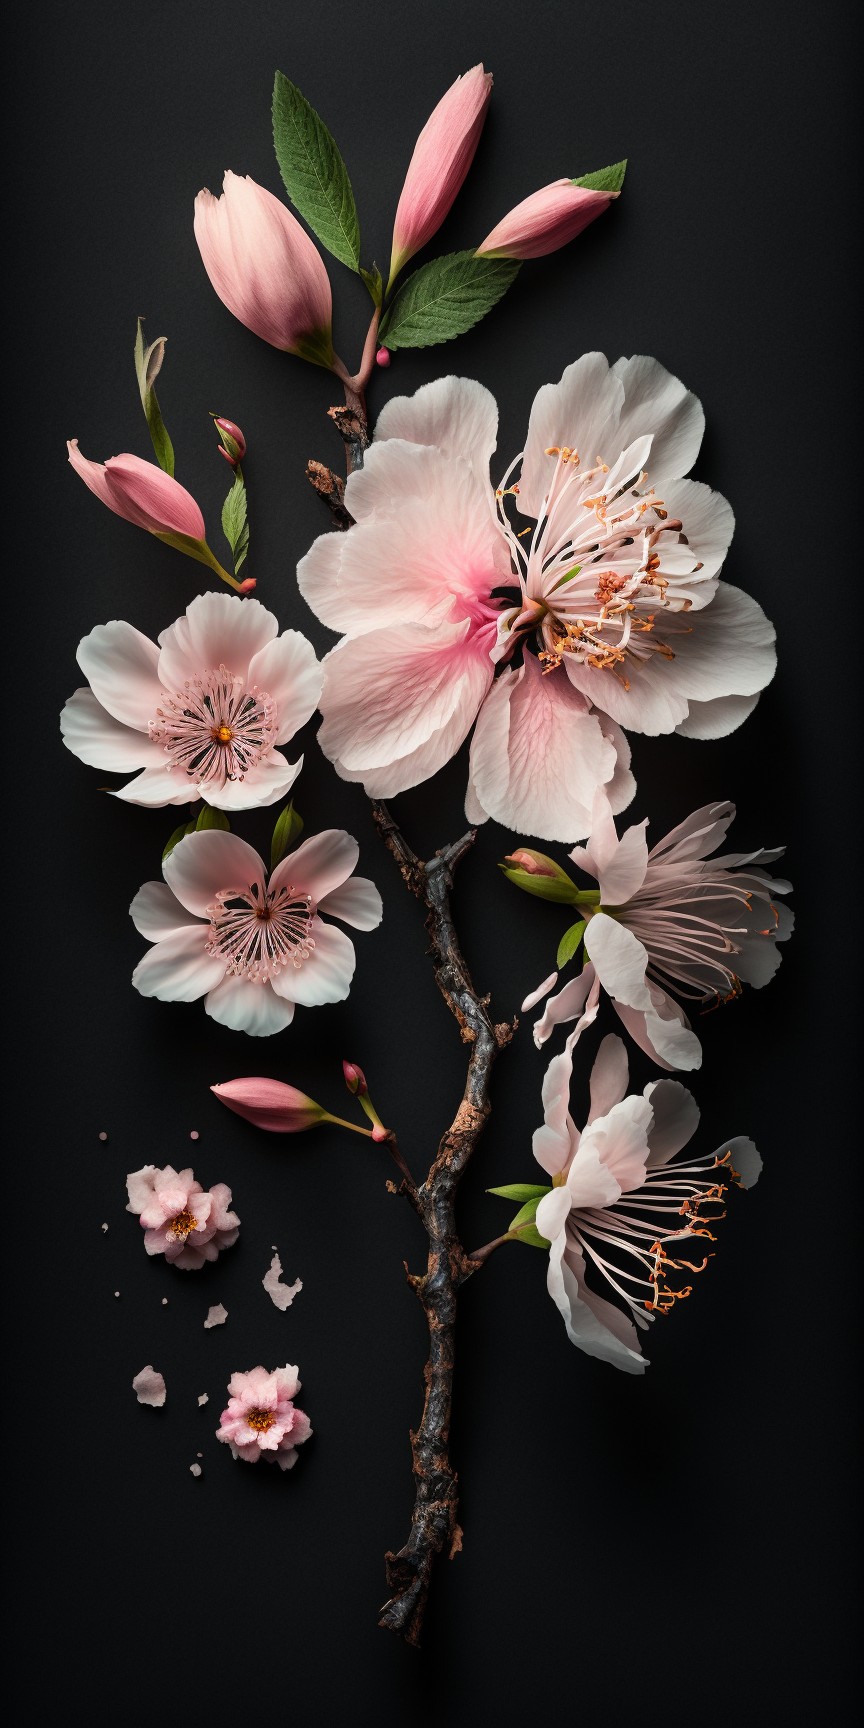 Blooming Peach Blossom of Super Tidying